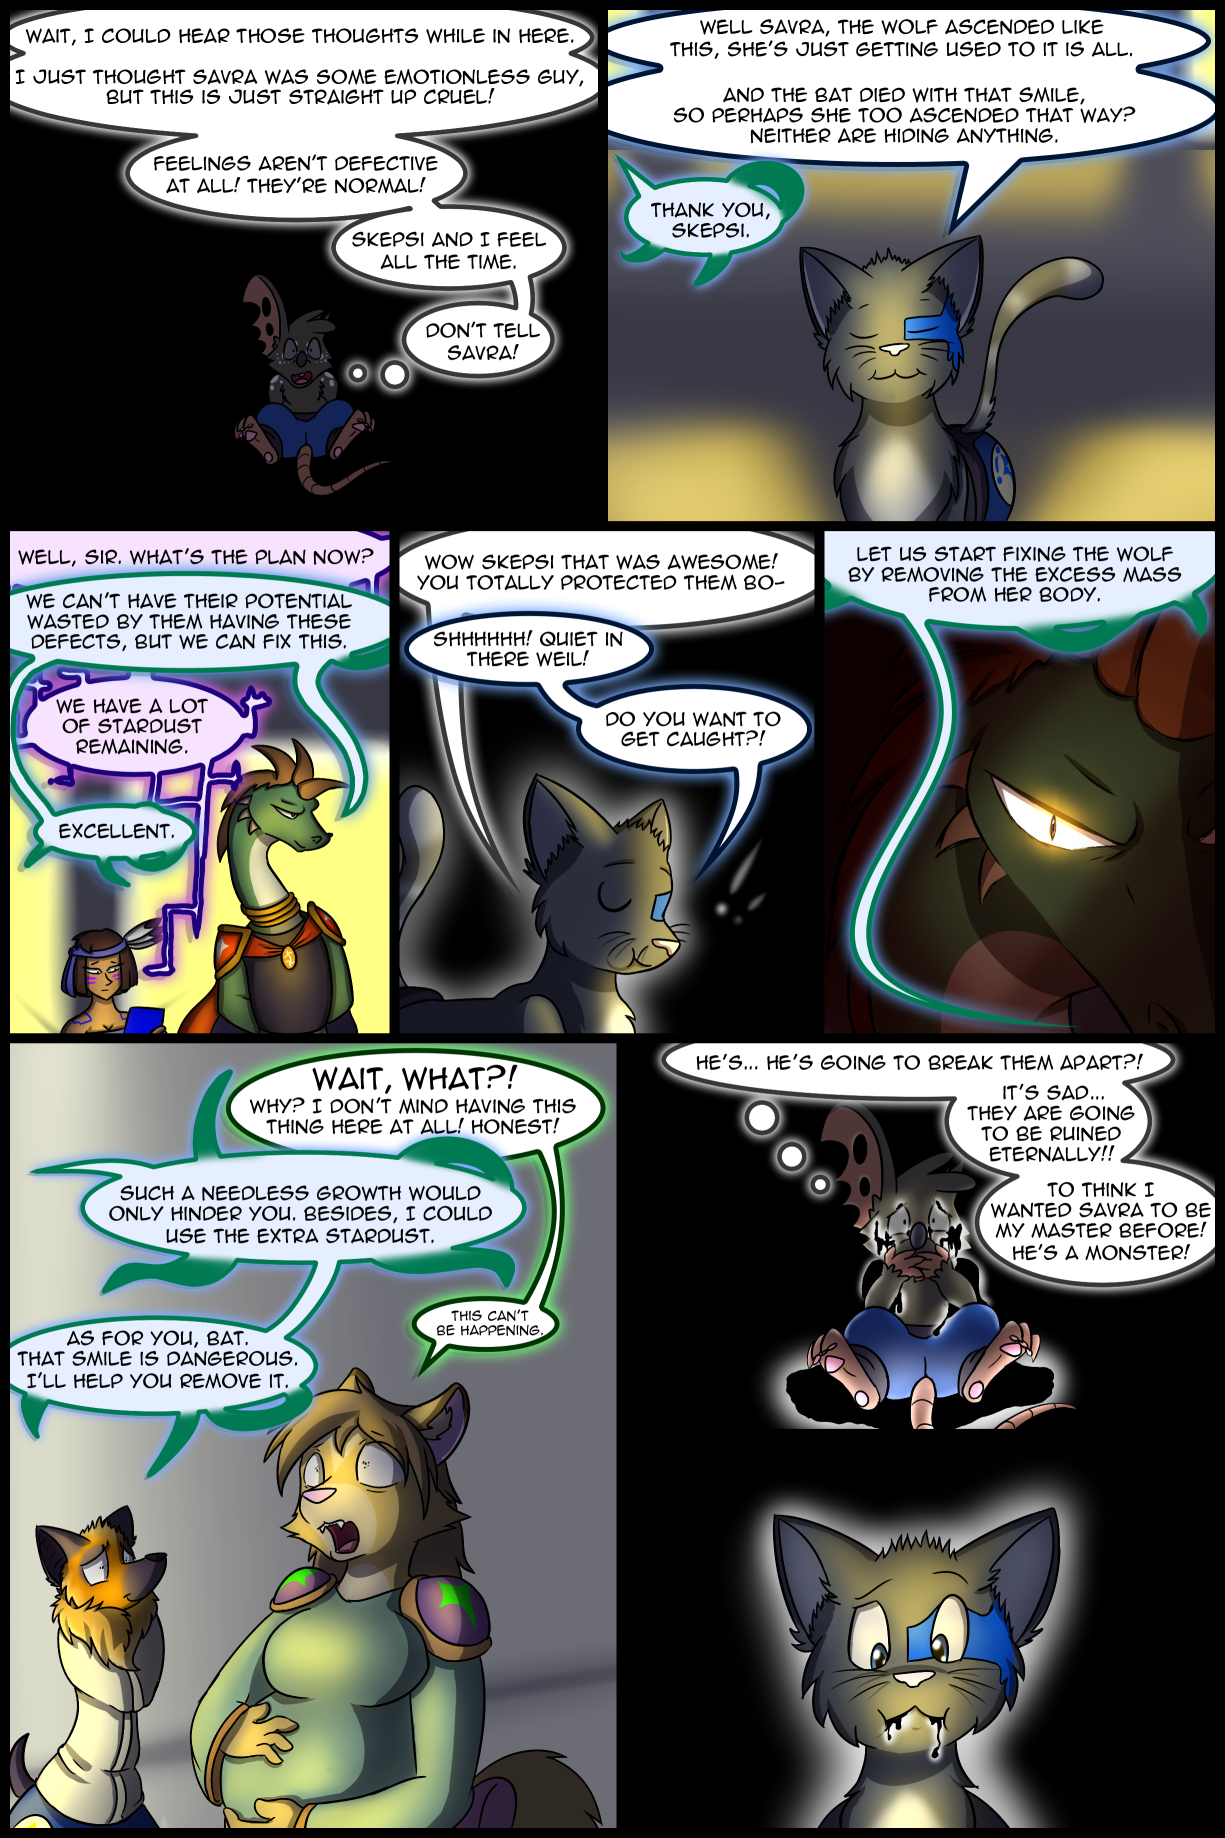 Ch4 Page 36 – “Fixing”